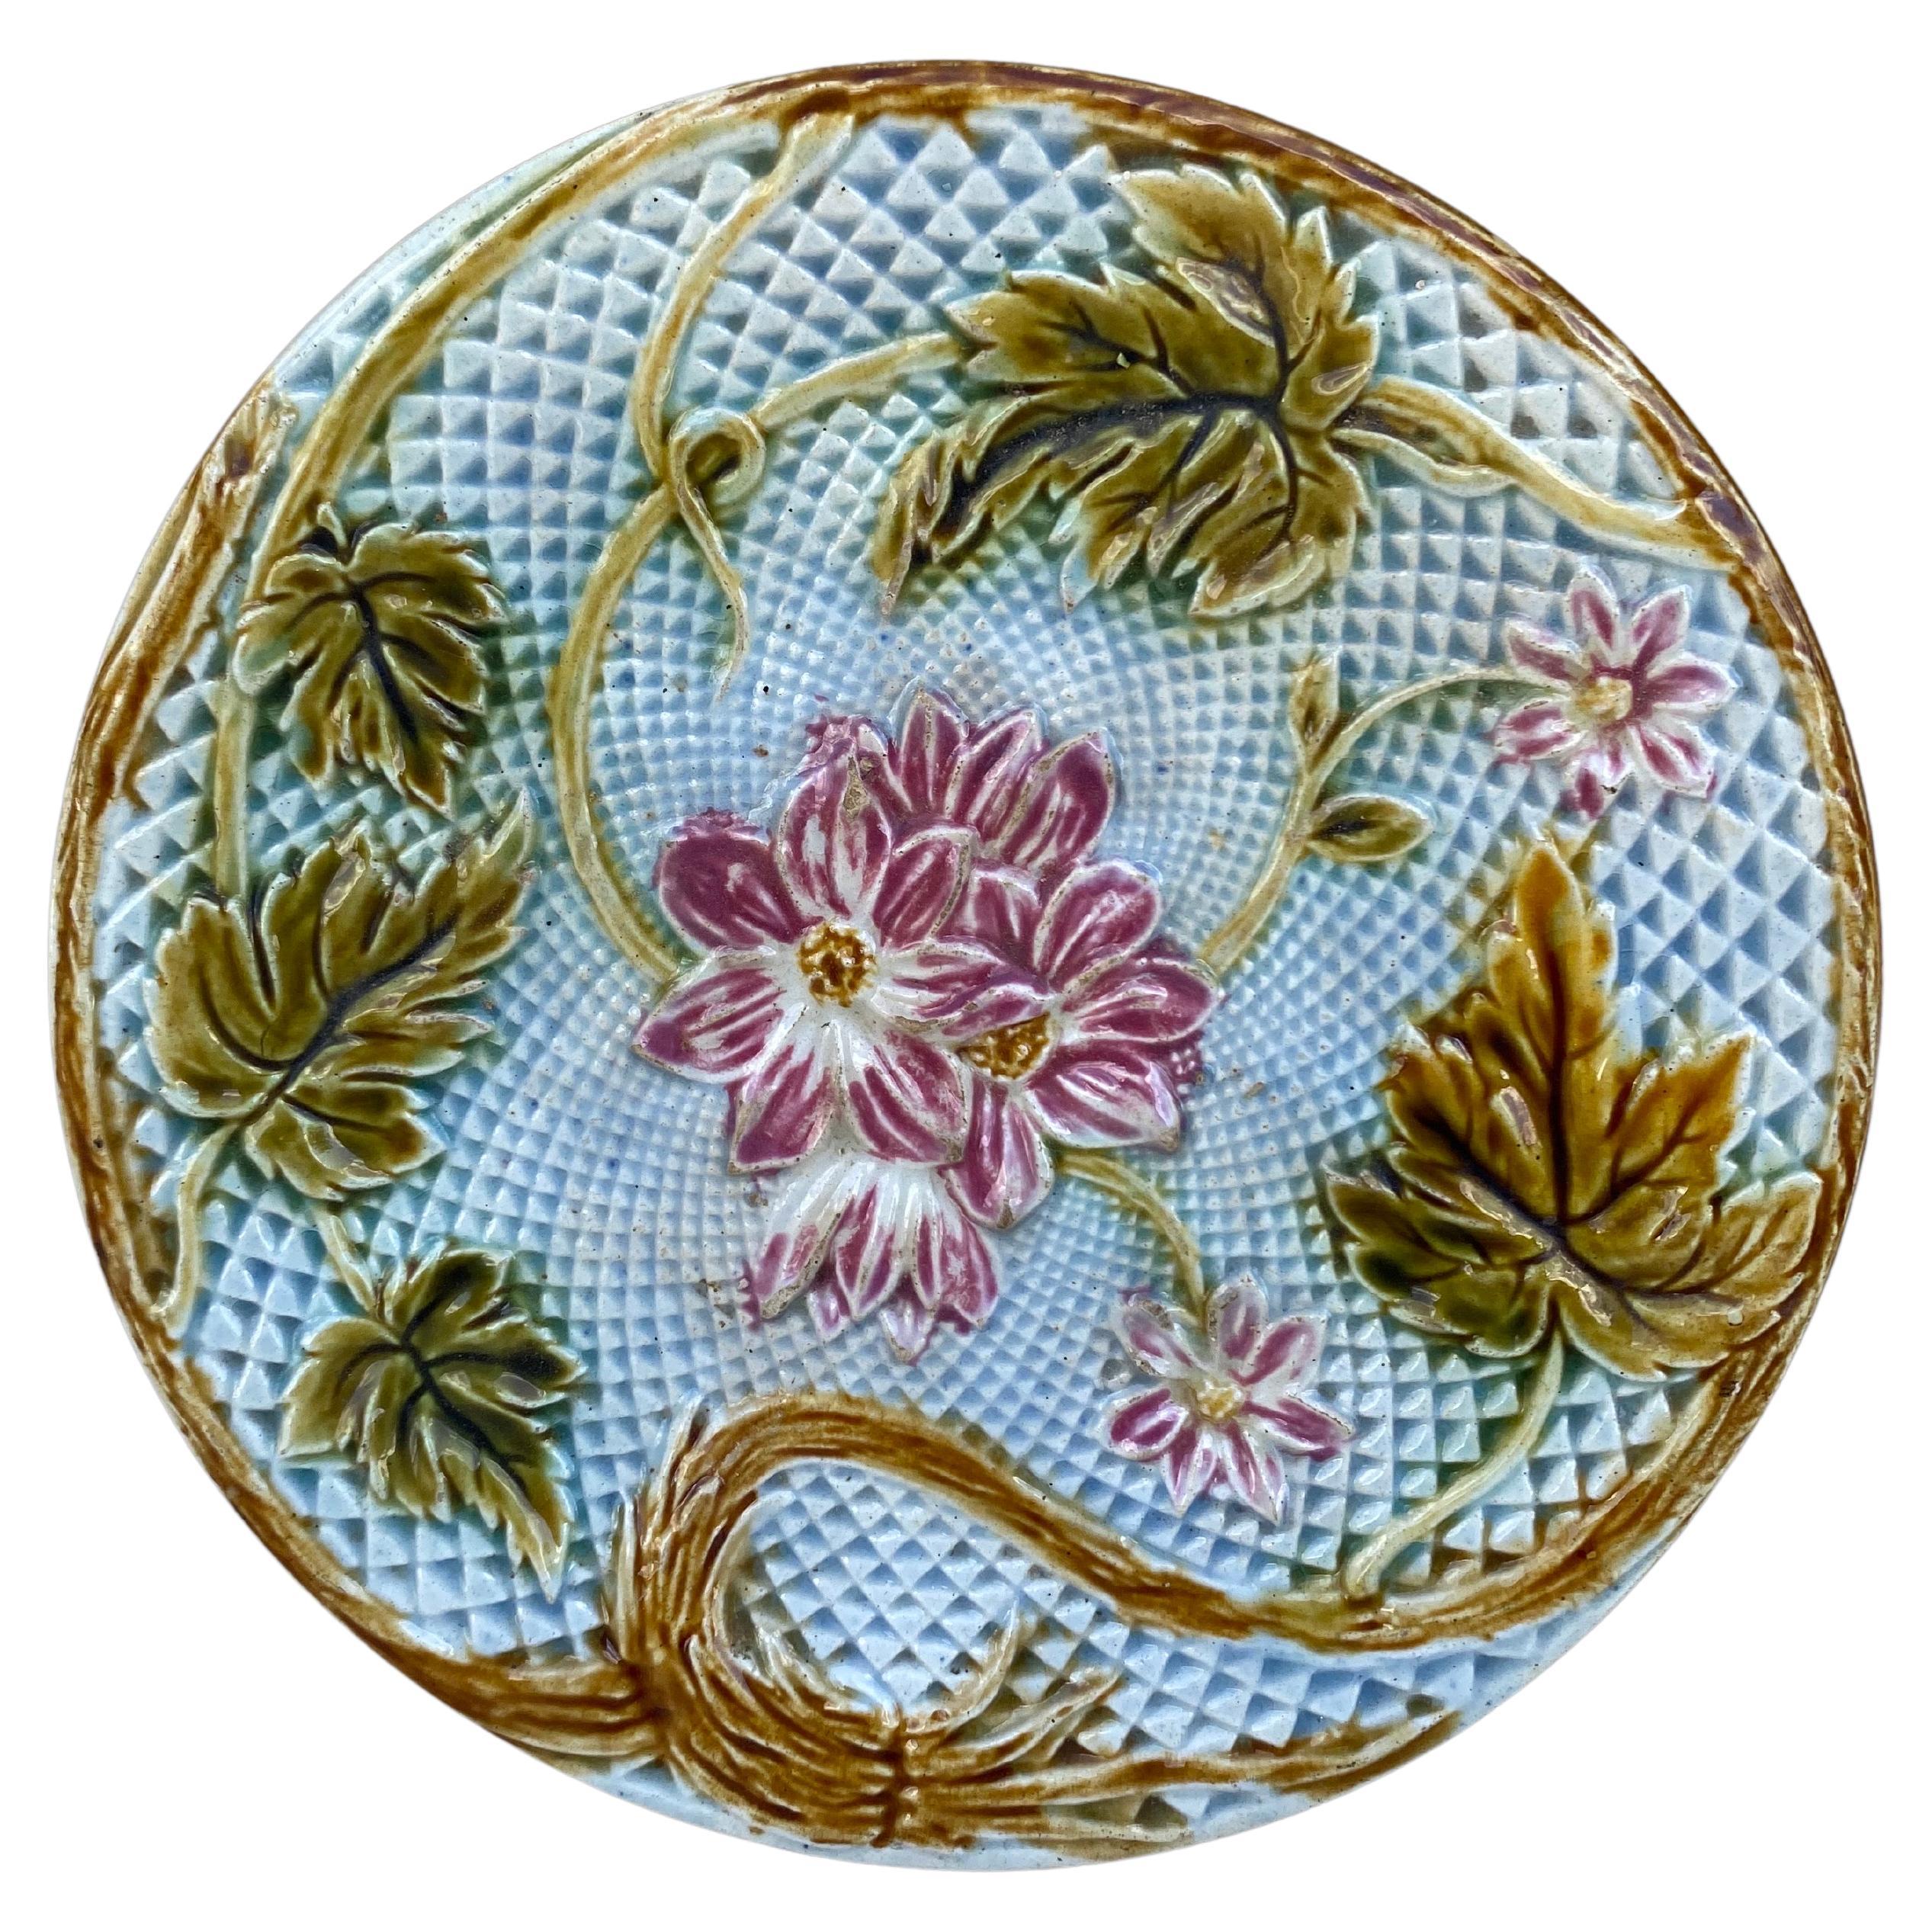 Lovely French Majolica plate pink flowers on a blue basket weave, circa 1880 attributed to Salins.